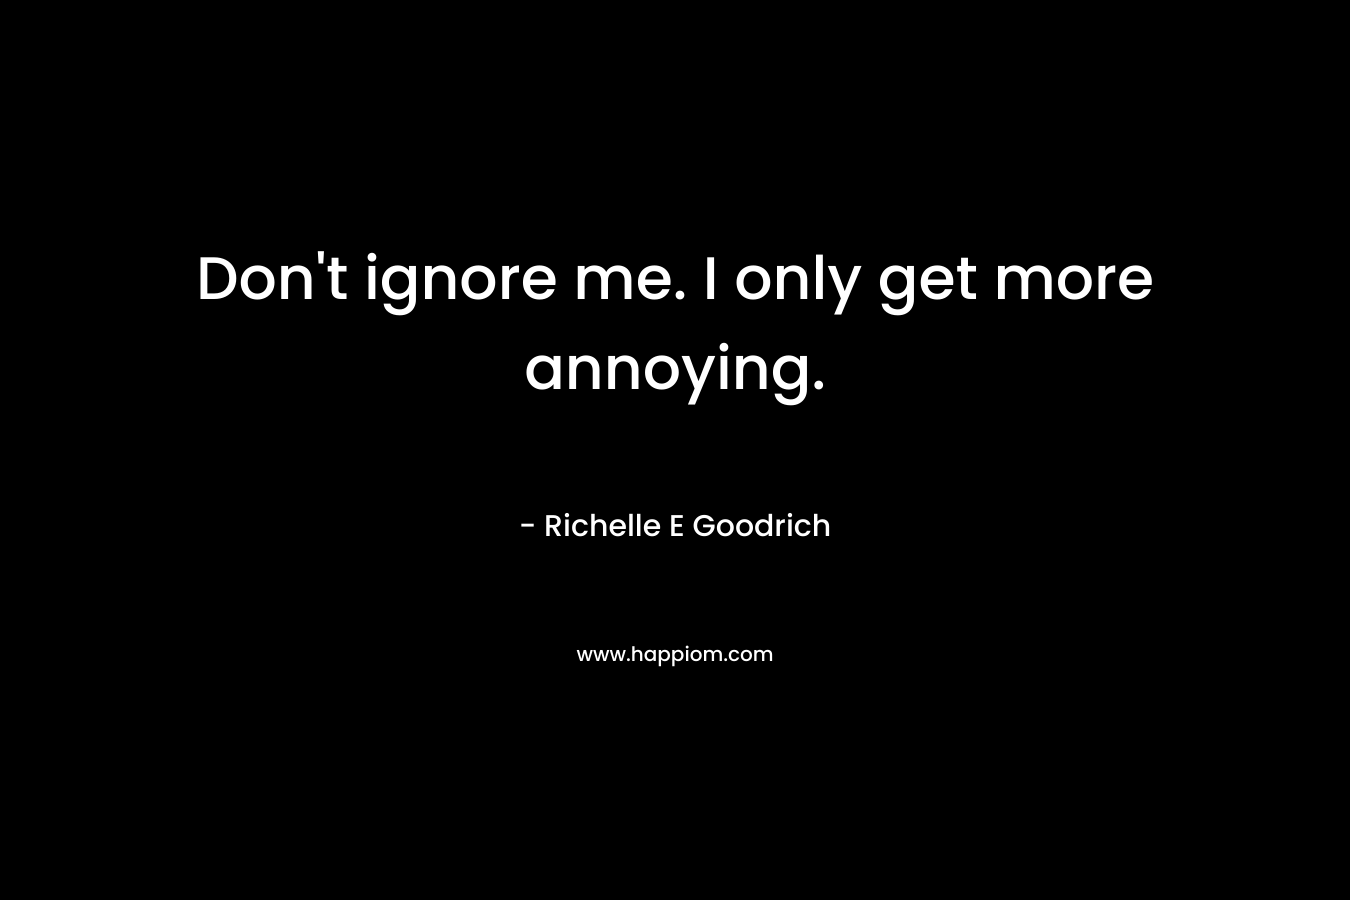 Don’t ignore me. I only get more annoying. – Richelle E Goodrich